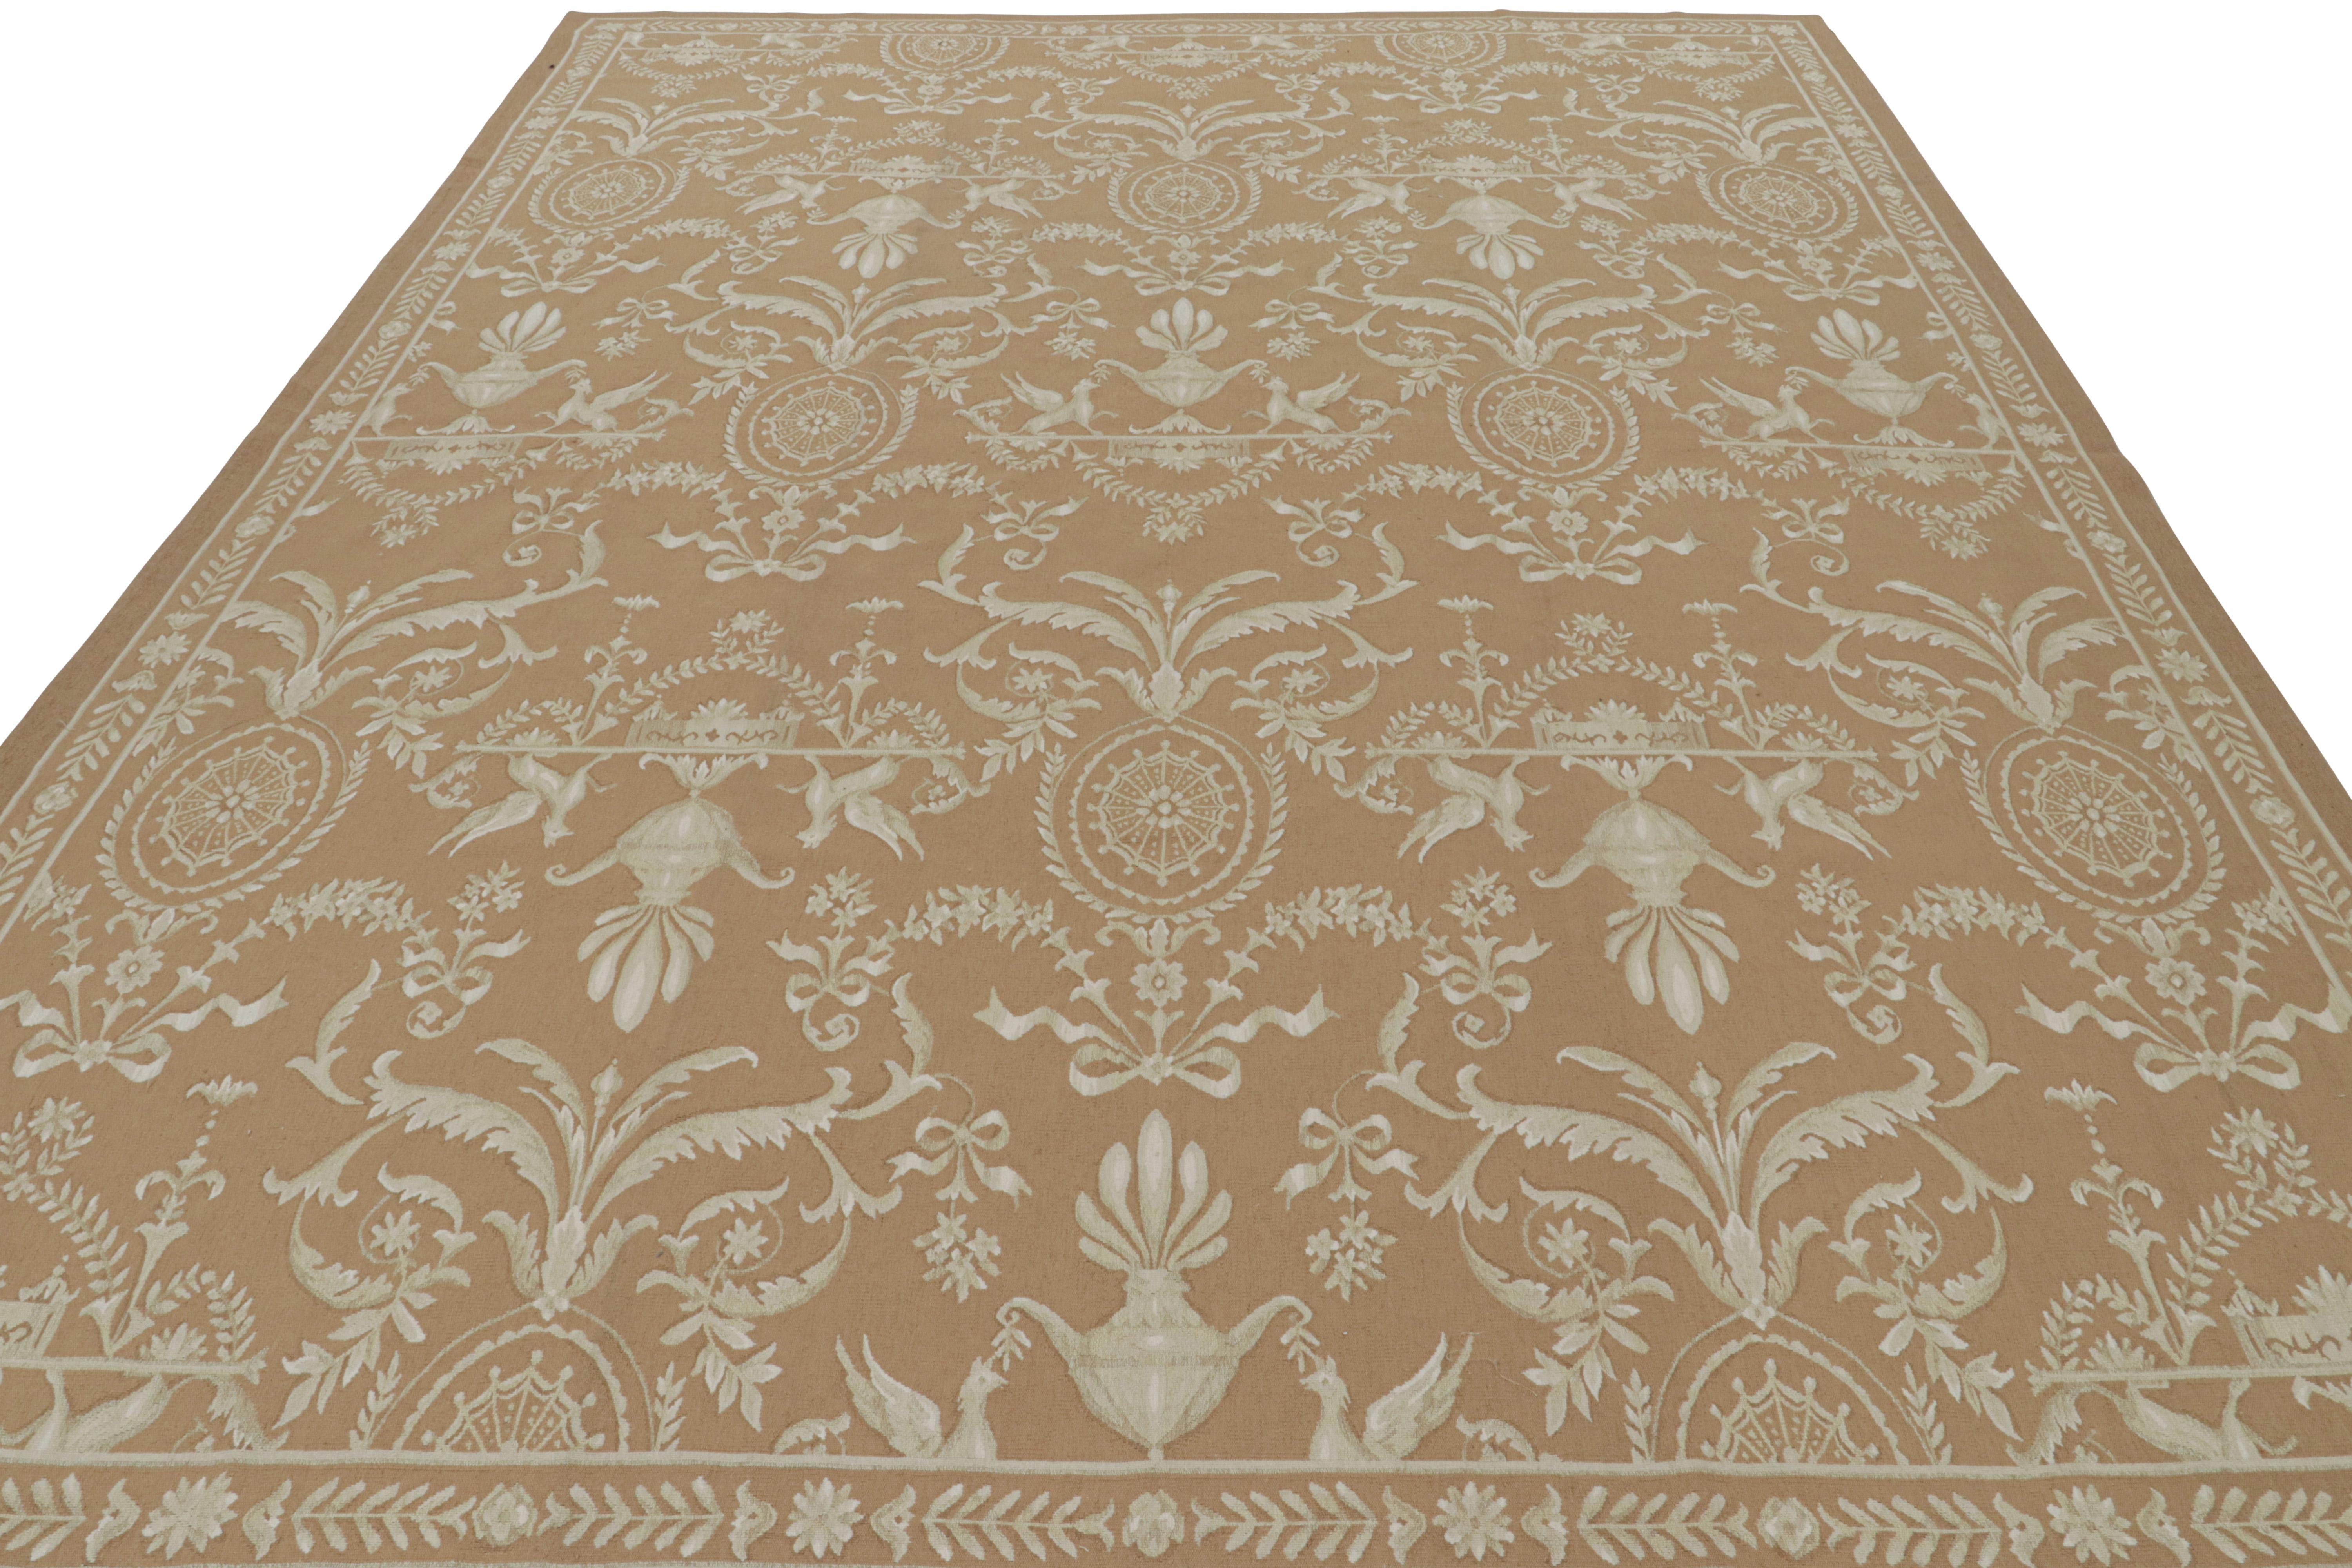 Modern Rug & Kilim’s Aubusson Style Flatweave Rug in Brown with Beige Floral Patterns For Sale